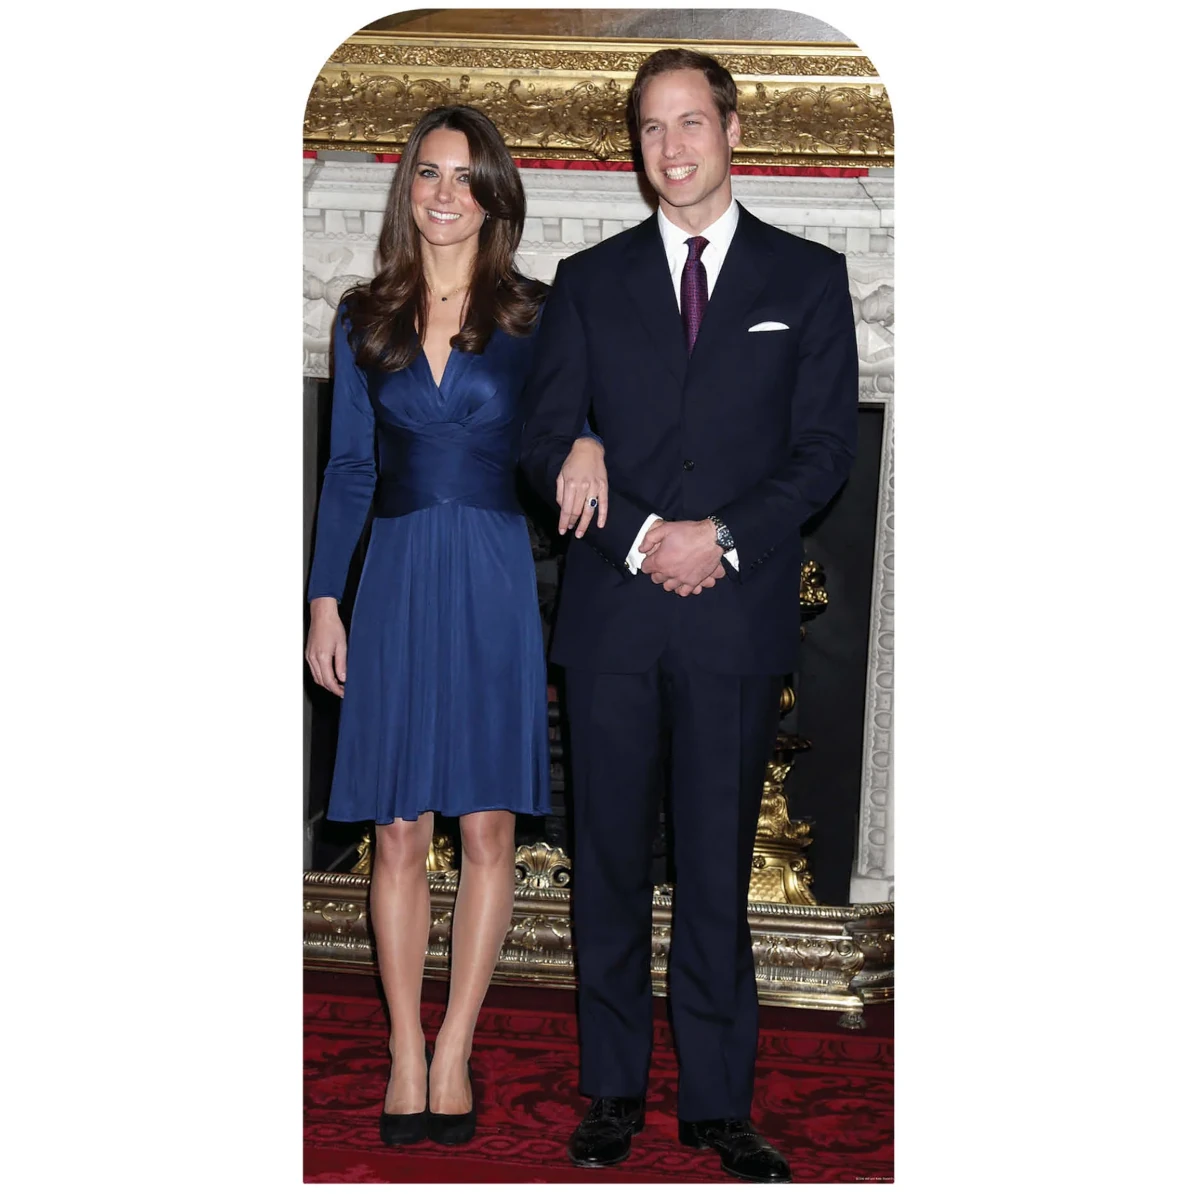 SC596 William & Catherine (Prince & Princess of Wales) Lifesize Stand-In Cardboard Cutout Standee